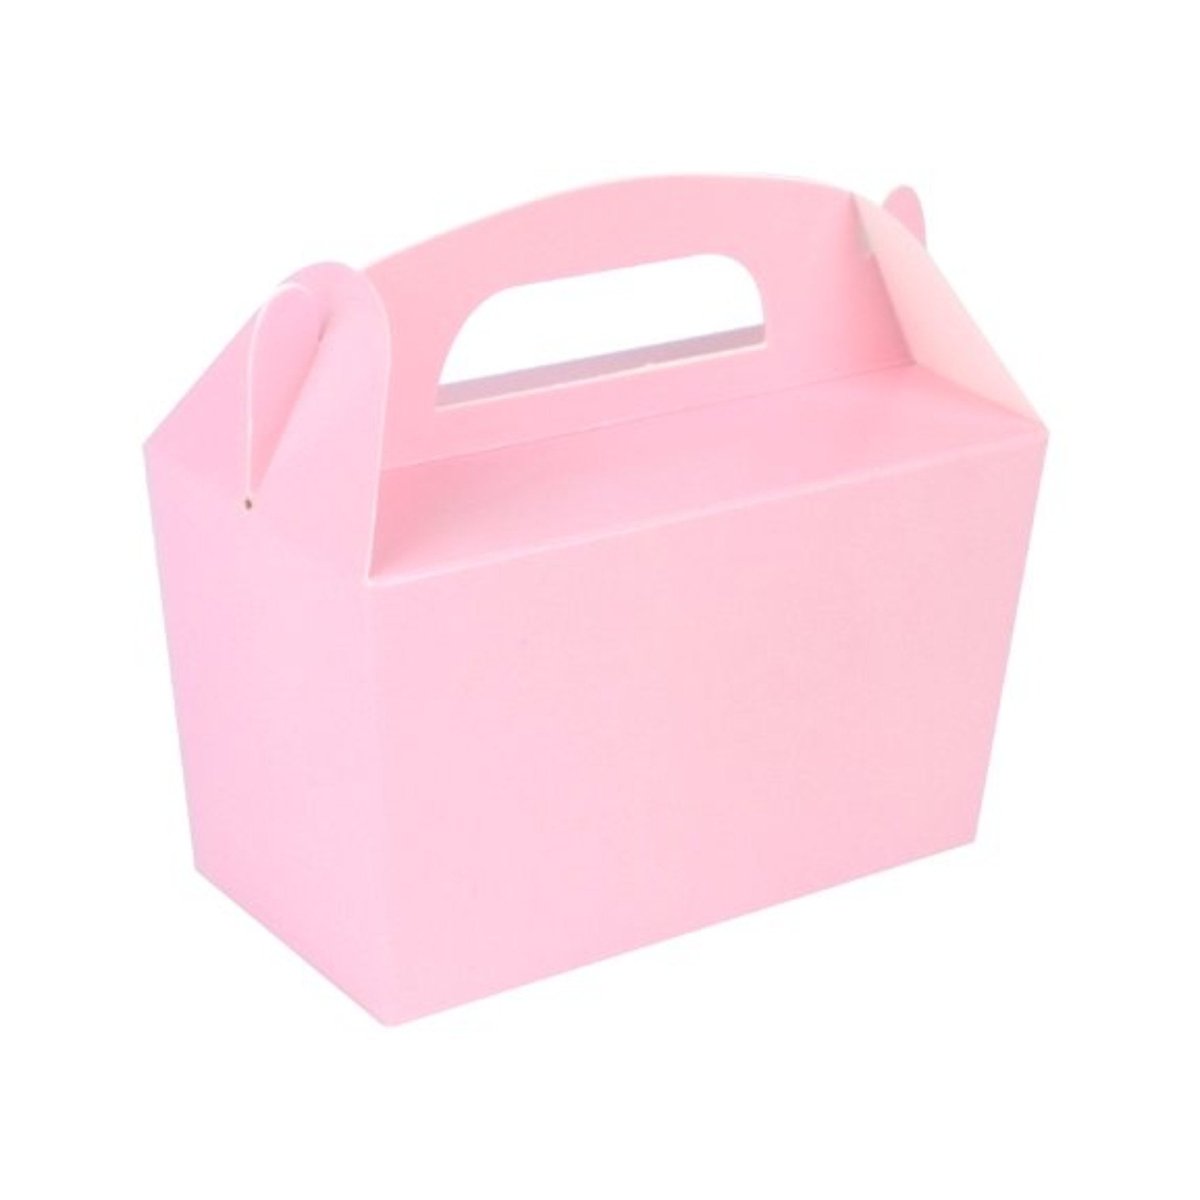 Baby Pink Treat Boxes 12 pack - Kids Party Craft